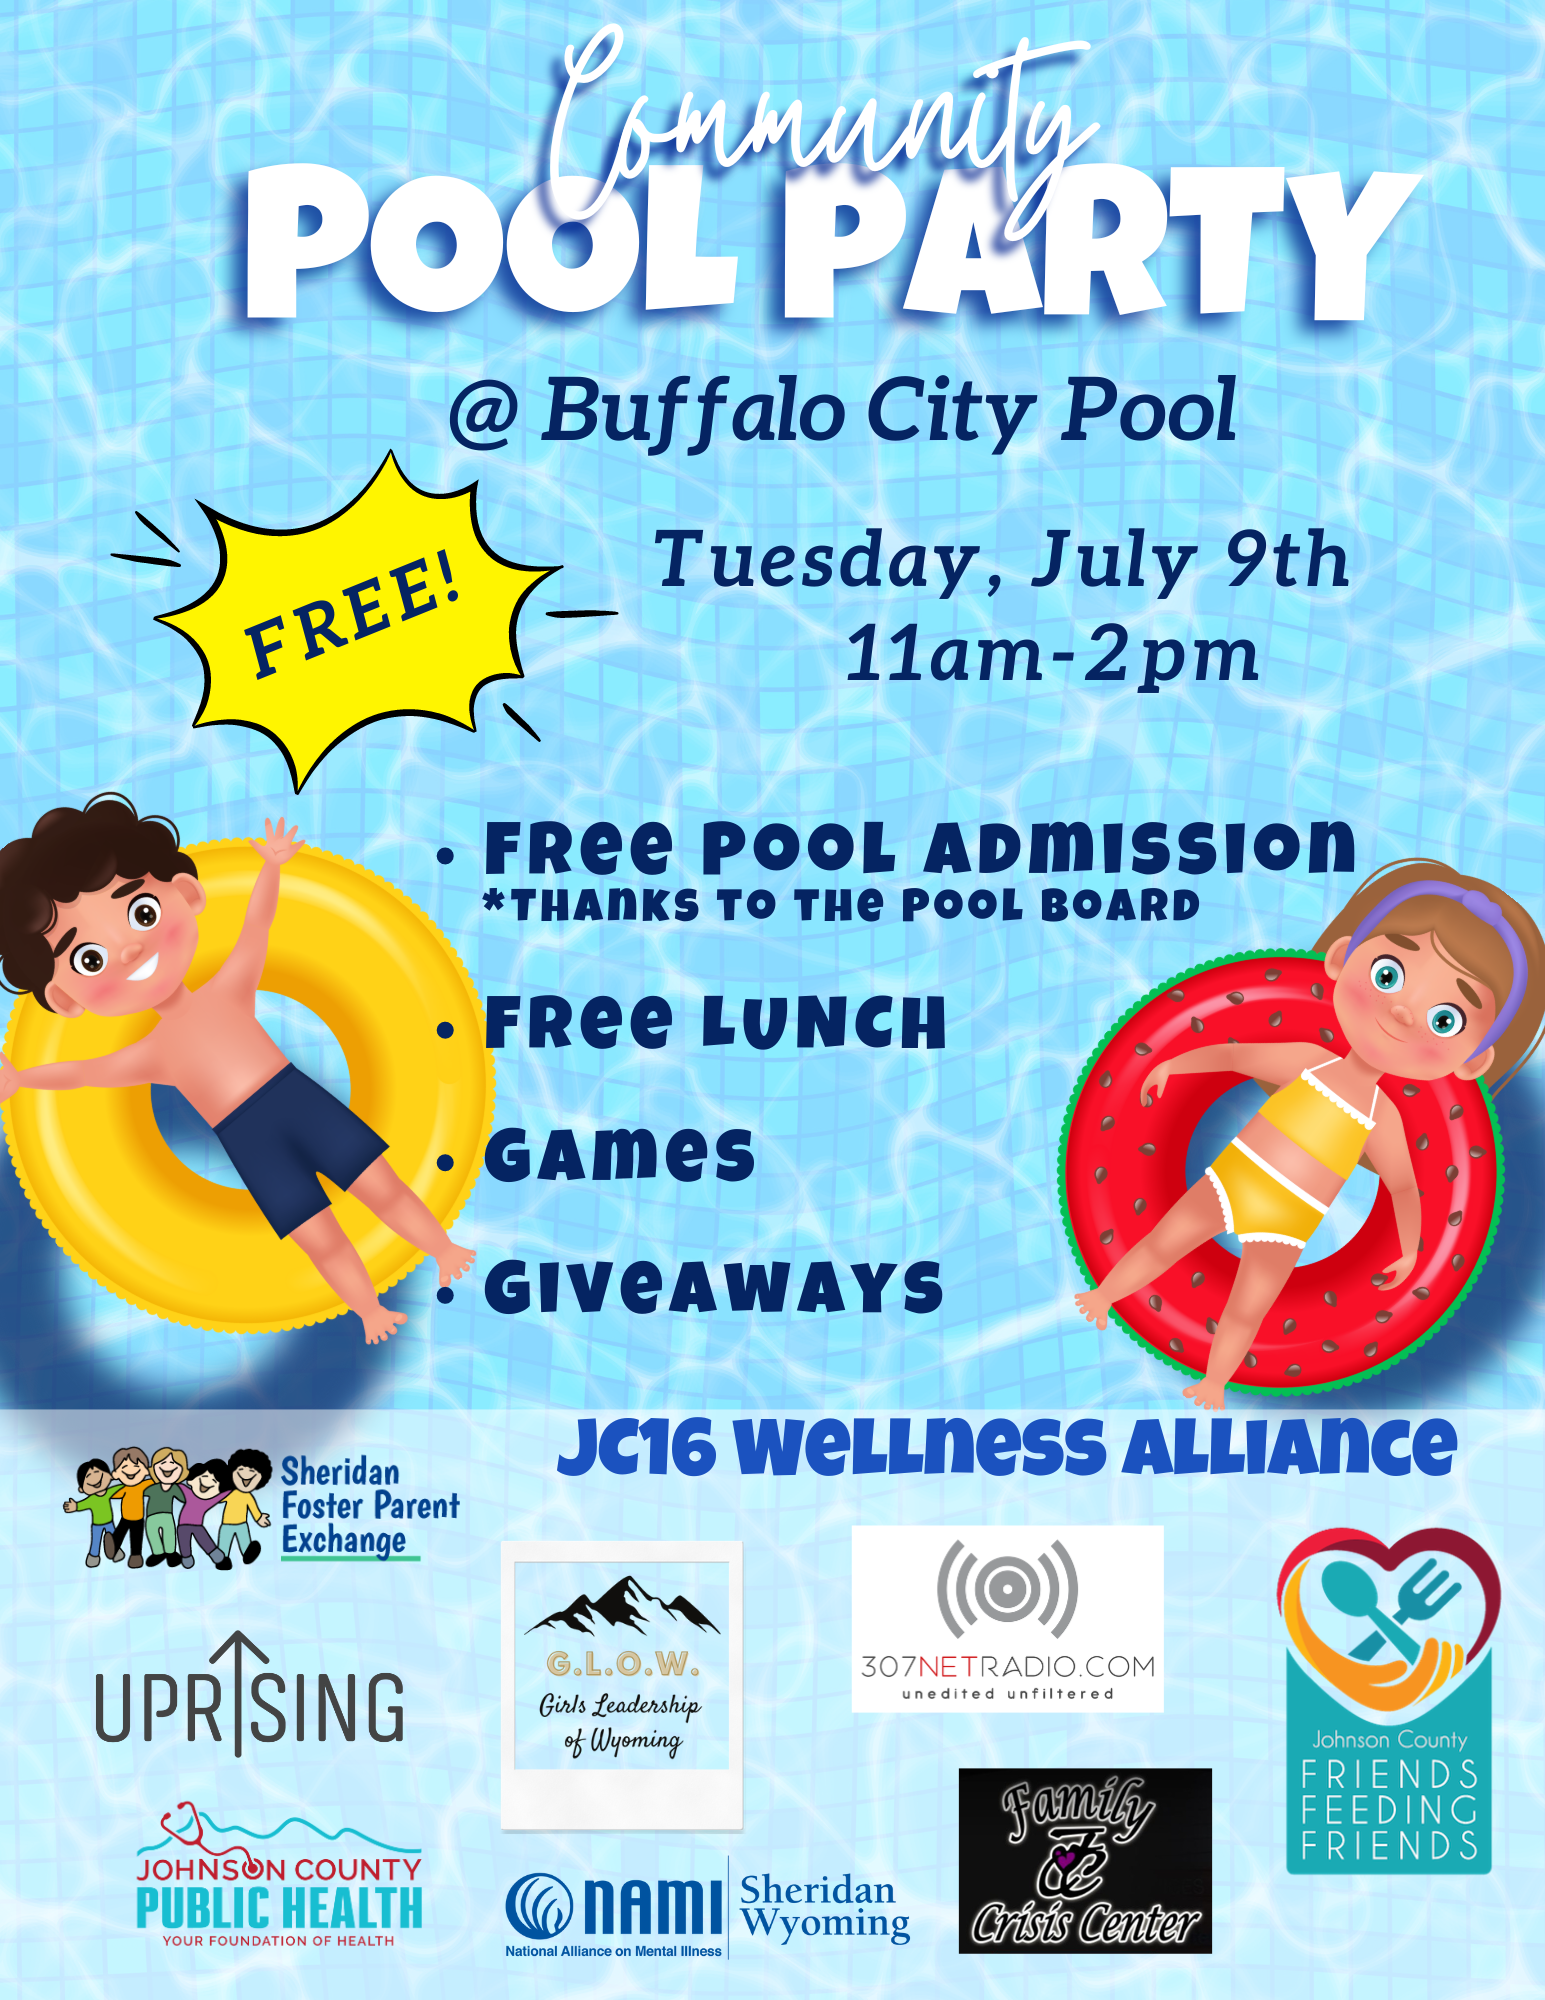 Free Lunch at the Community Pool Party!